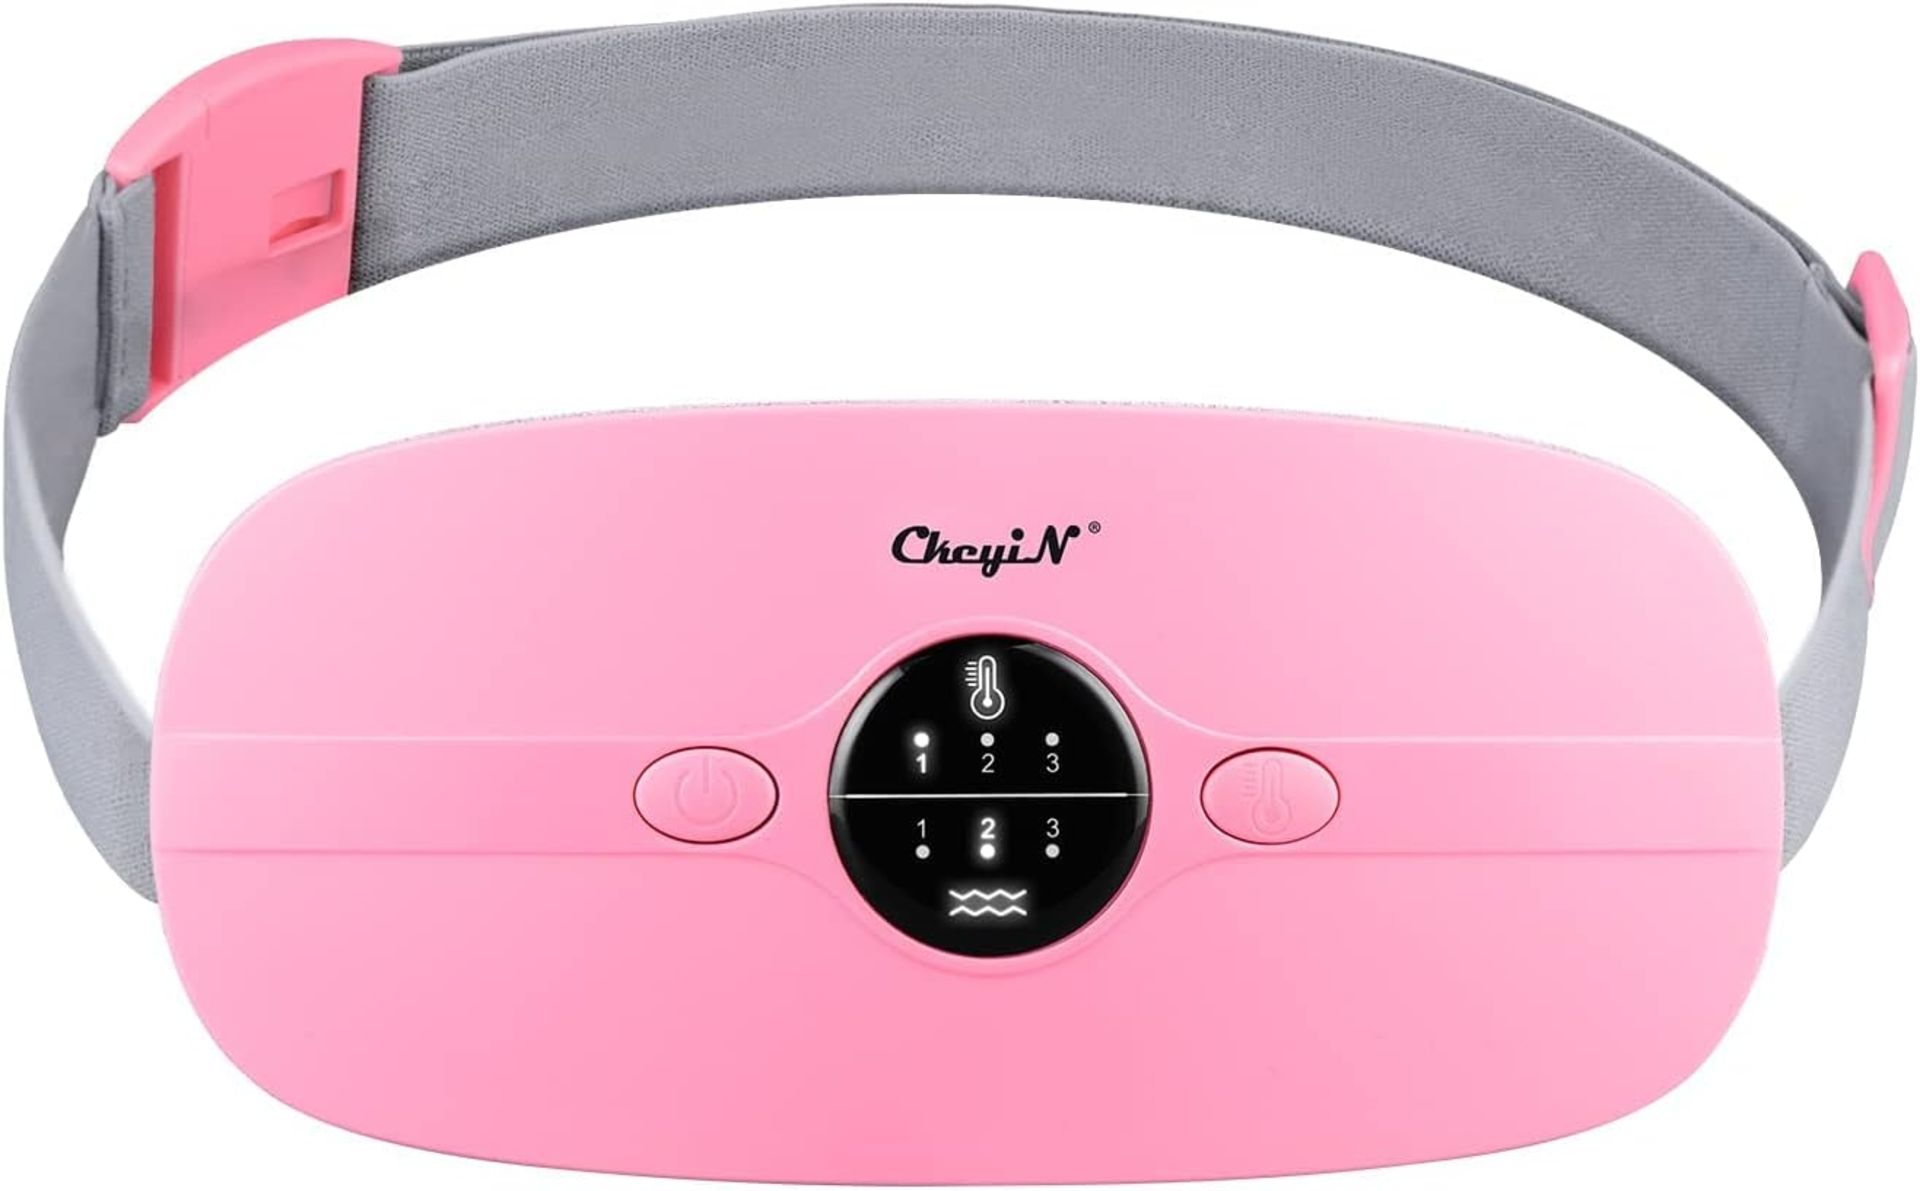 RRP £24.99 CkeyiN Menstrual Heating Pad, Portable Electric Waist Belt with 3 Heat Levels and 3